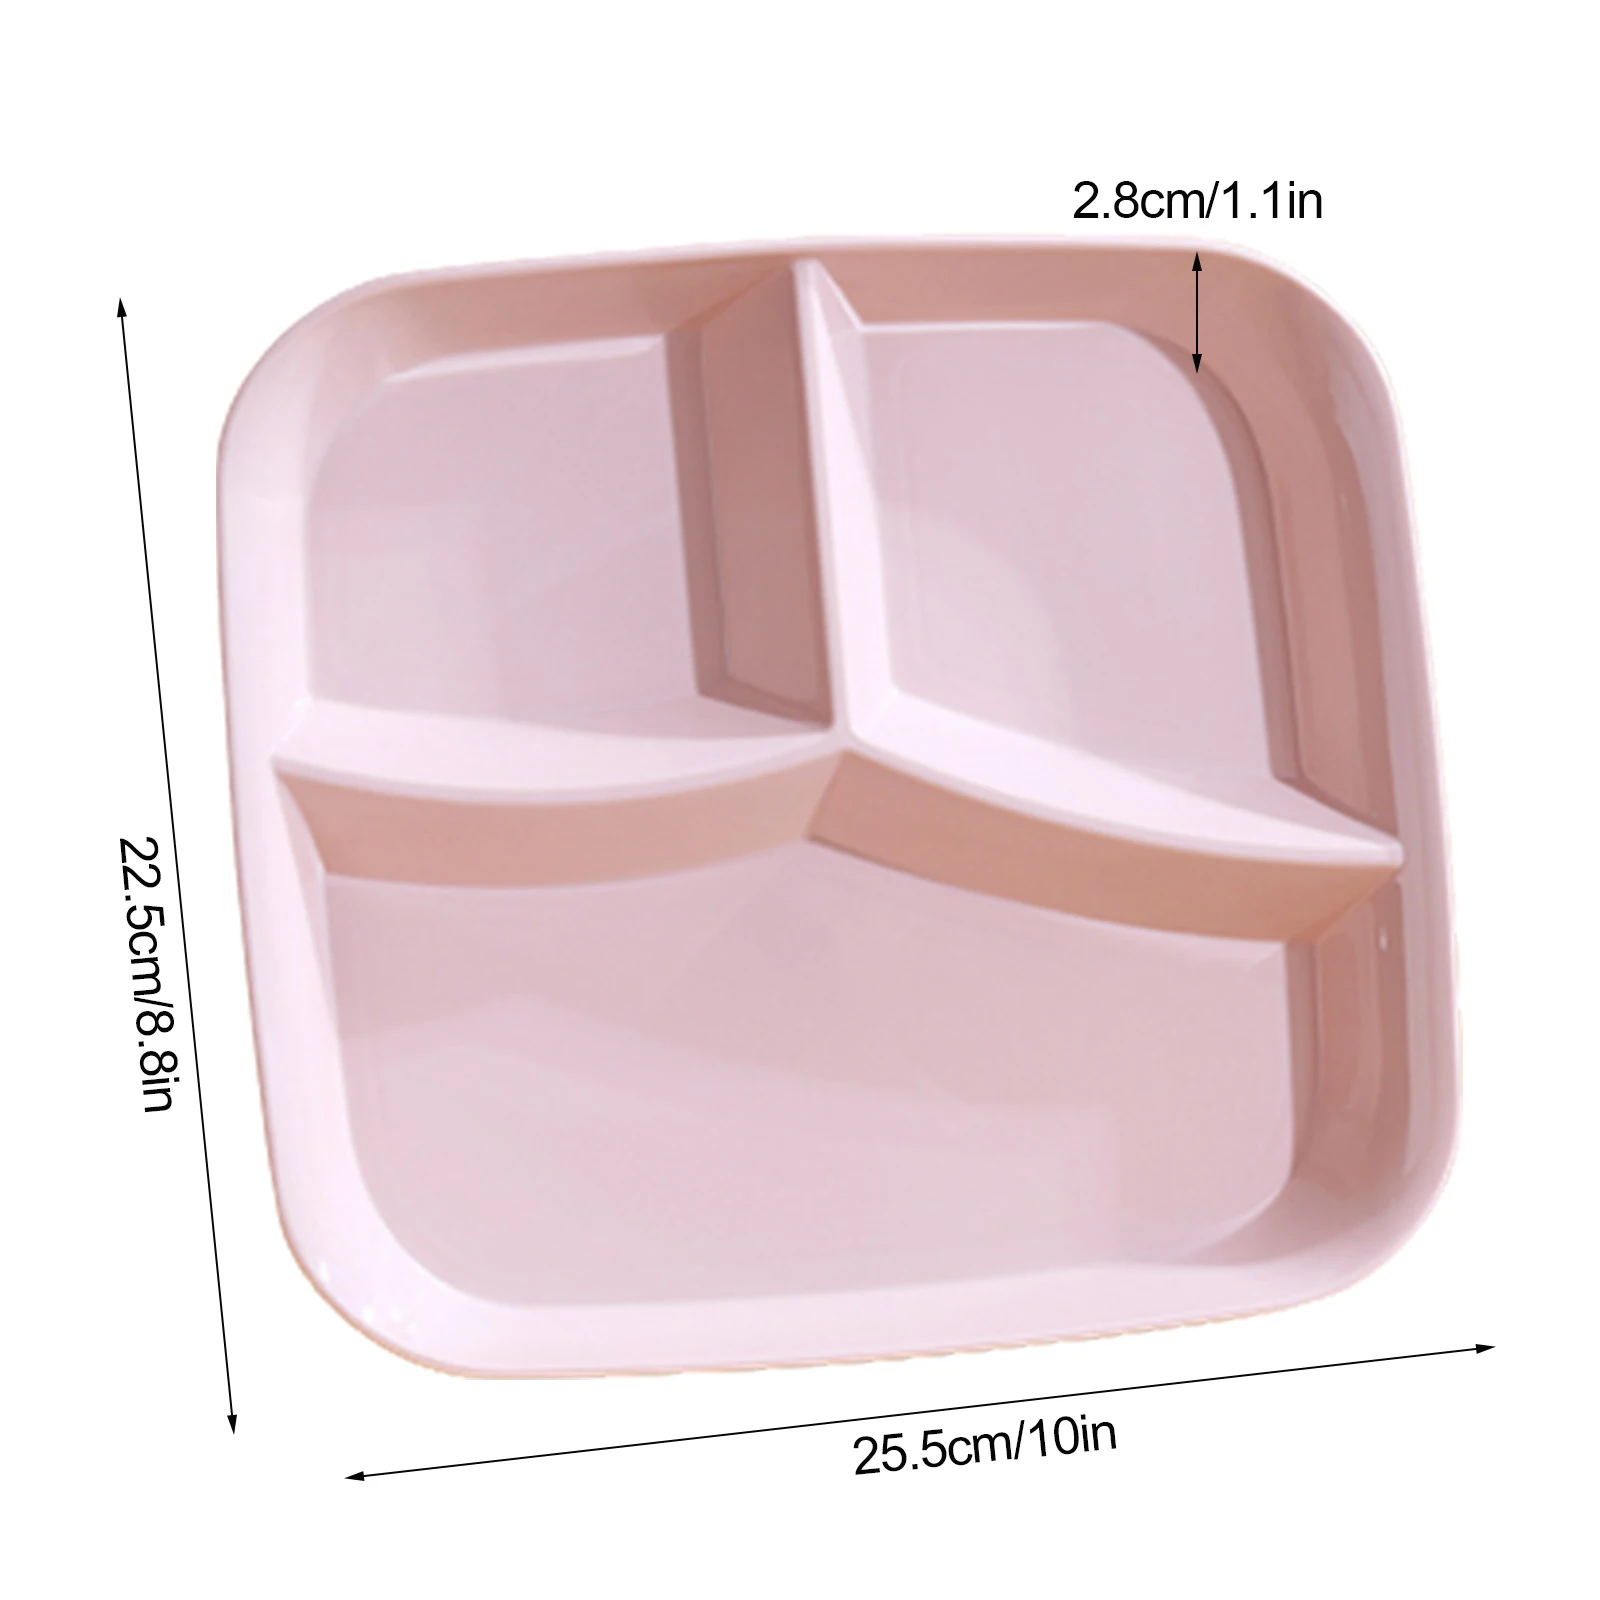 https://ae01.alicdn.com/kf/S59b1f416ba52470f93597a494de14dd8U/Plastic-Reusable-Divided-Plates-Bariatric-Plates-for-Portion-Control-Dinnerware-with-3-Compartments.jpg